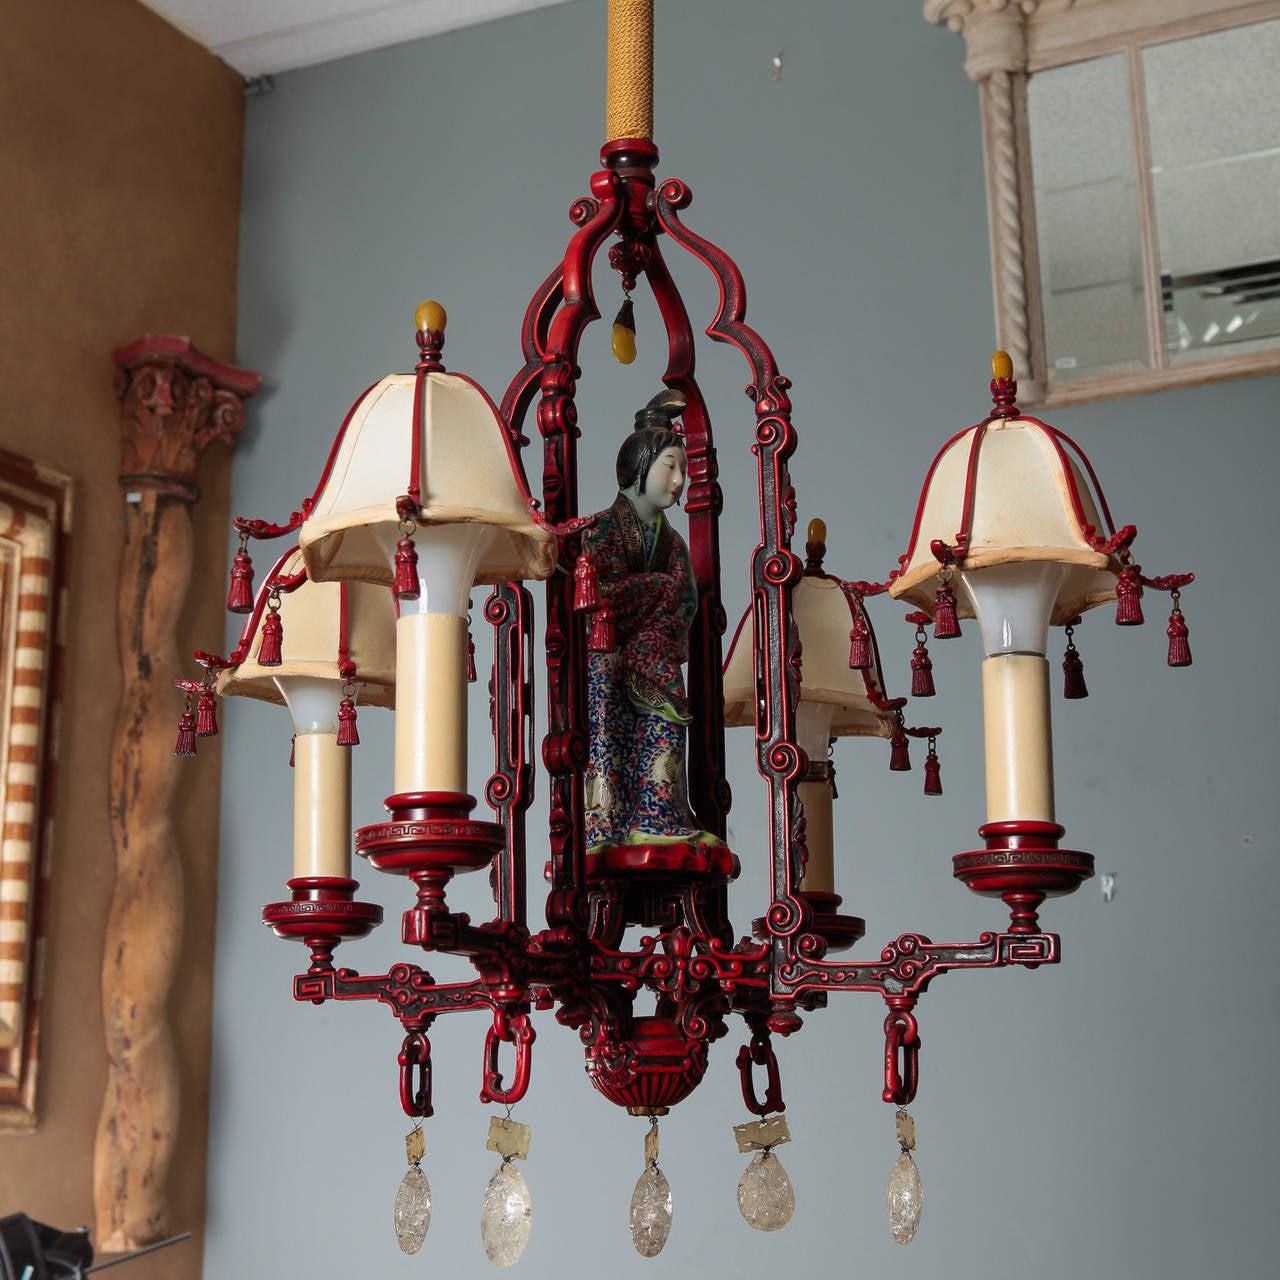 Early 20th Century Red Chinoiserie Figural Chandelier with Original Shades and Rock Crystals